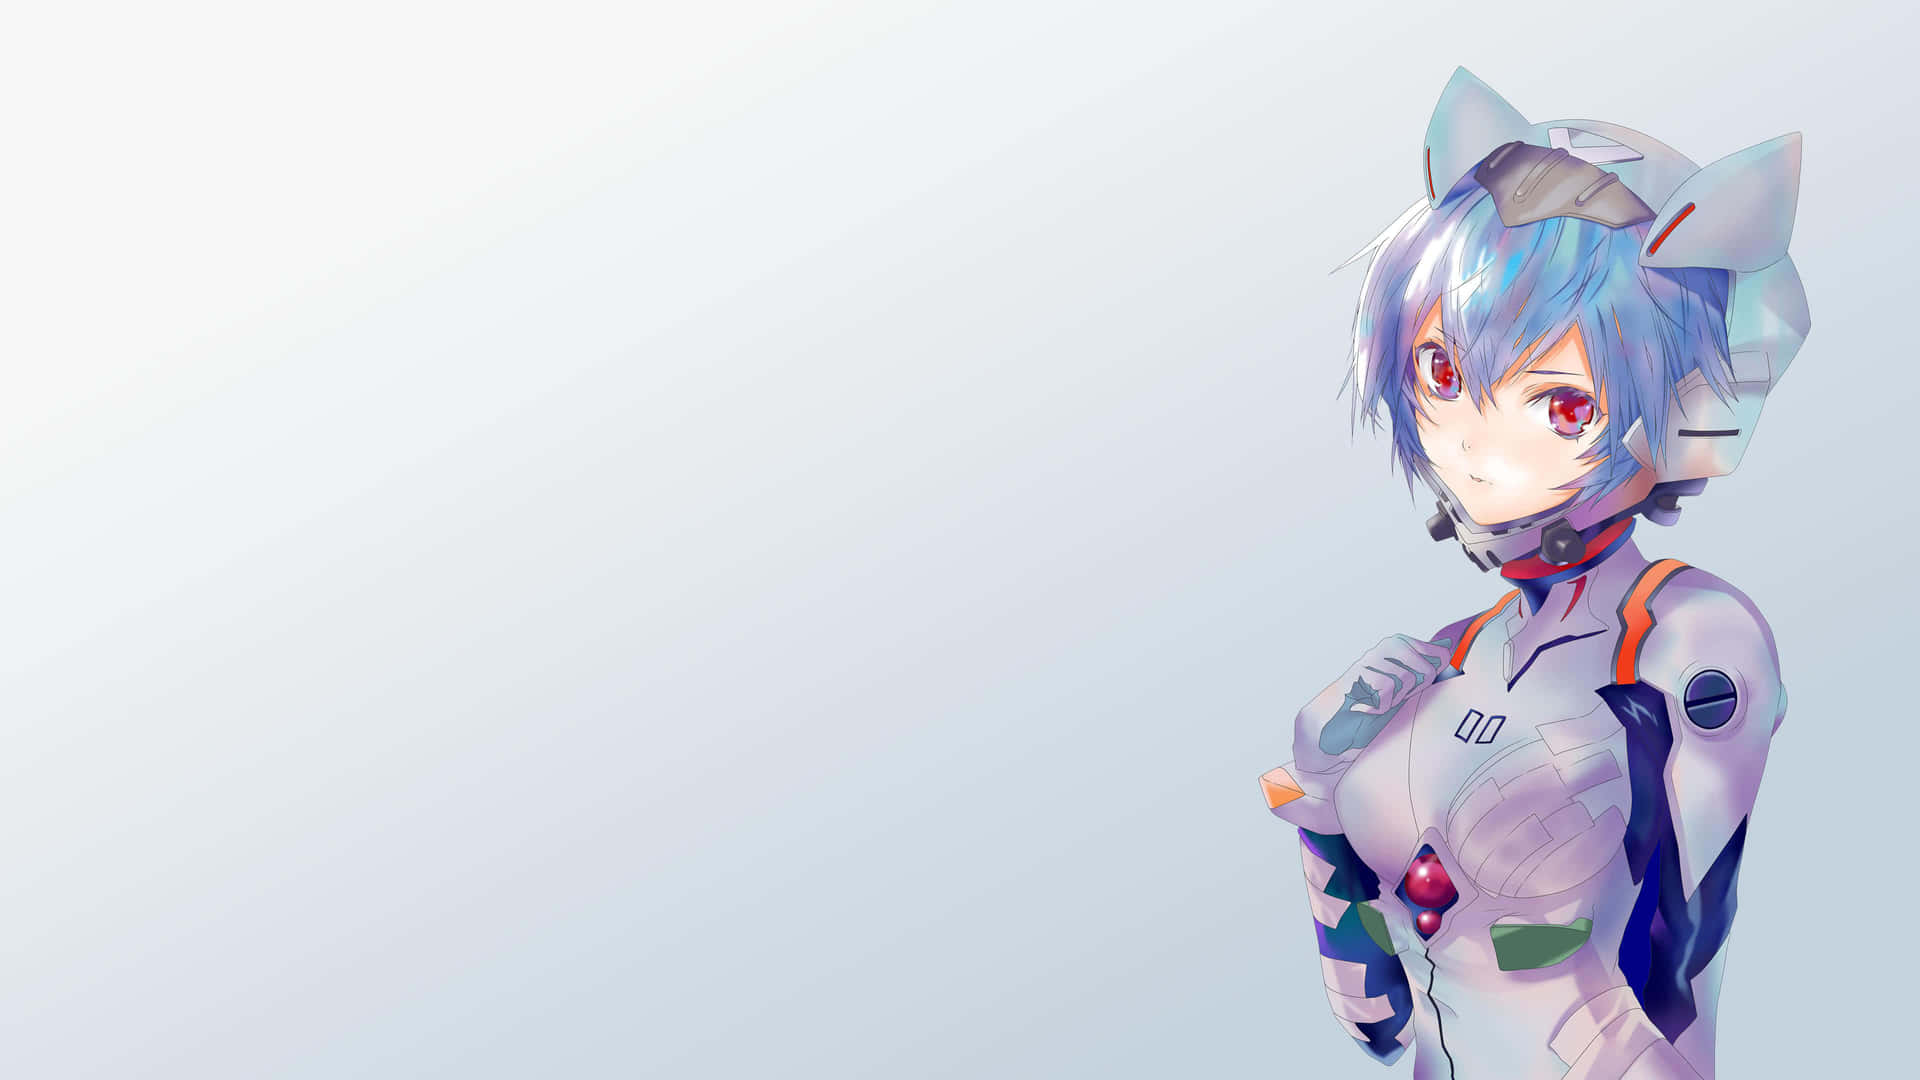 Rei Ayanami posing in her plugsuit with a captivating background Wallpaper